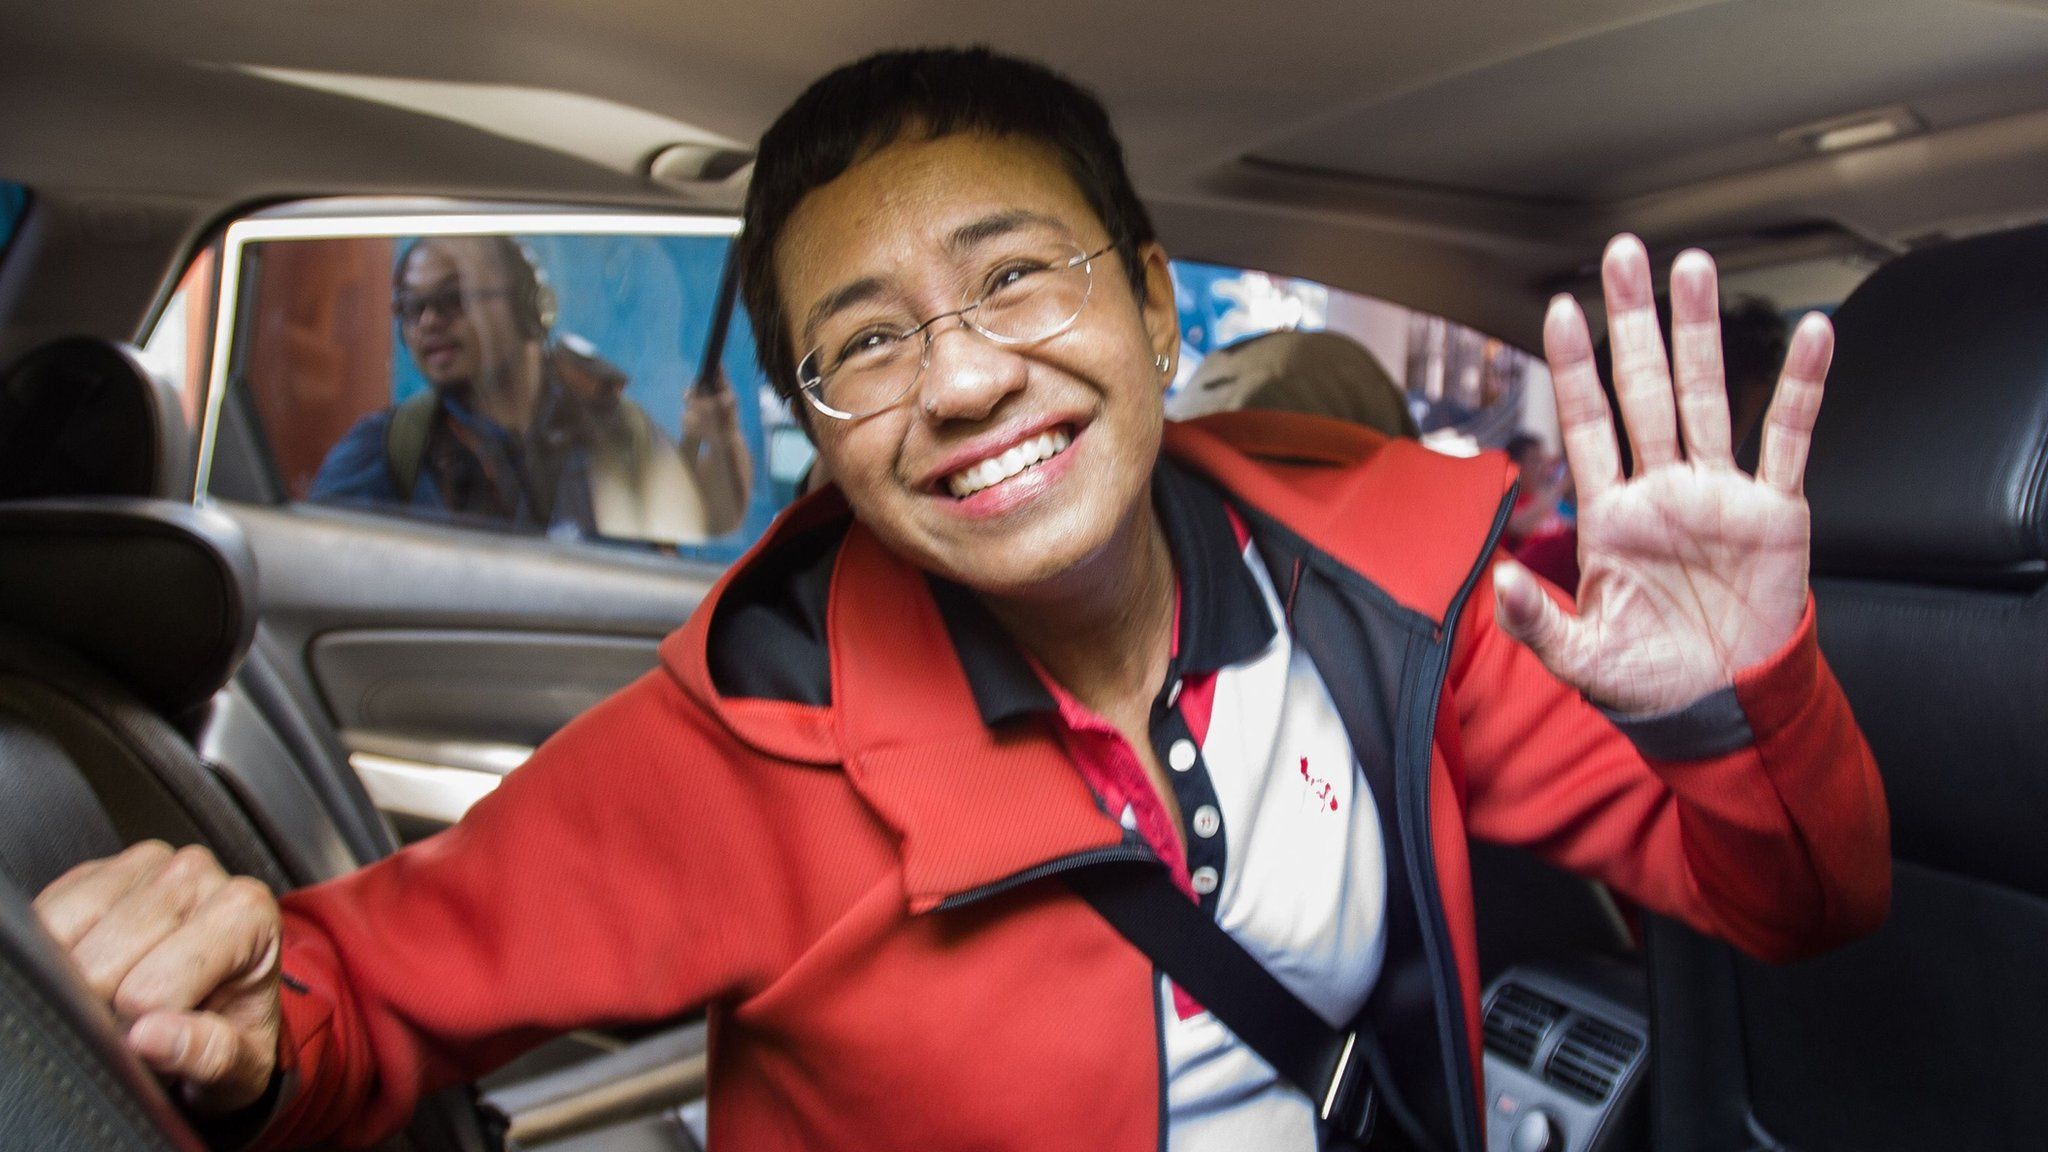 Philippine journalist Maria Ressa waves to photographers after posting bail outside a court building in Manila in March 2019